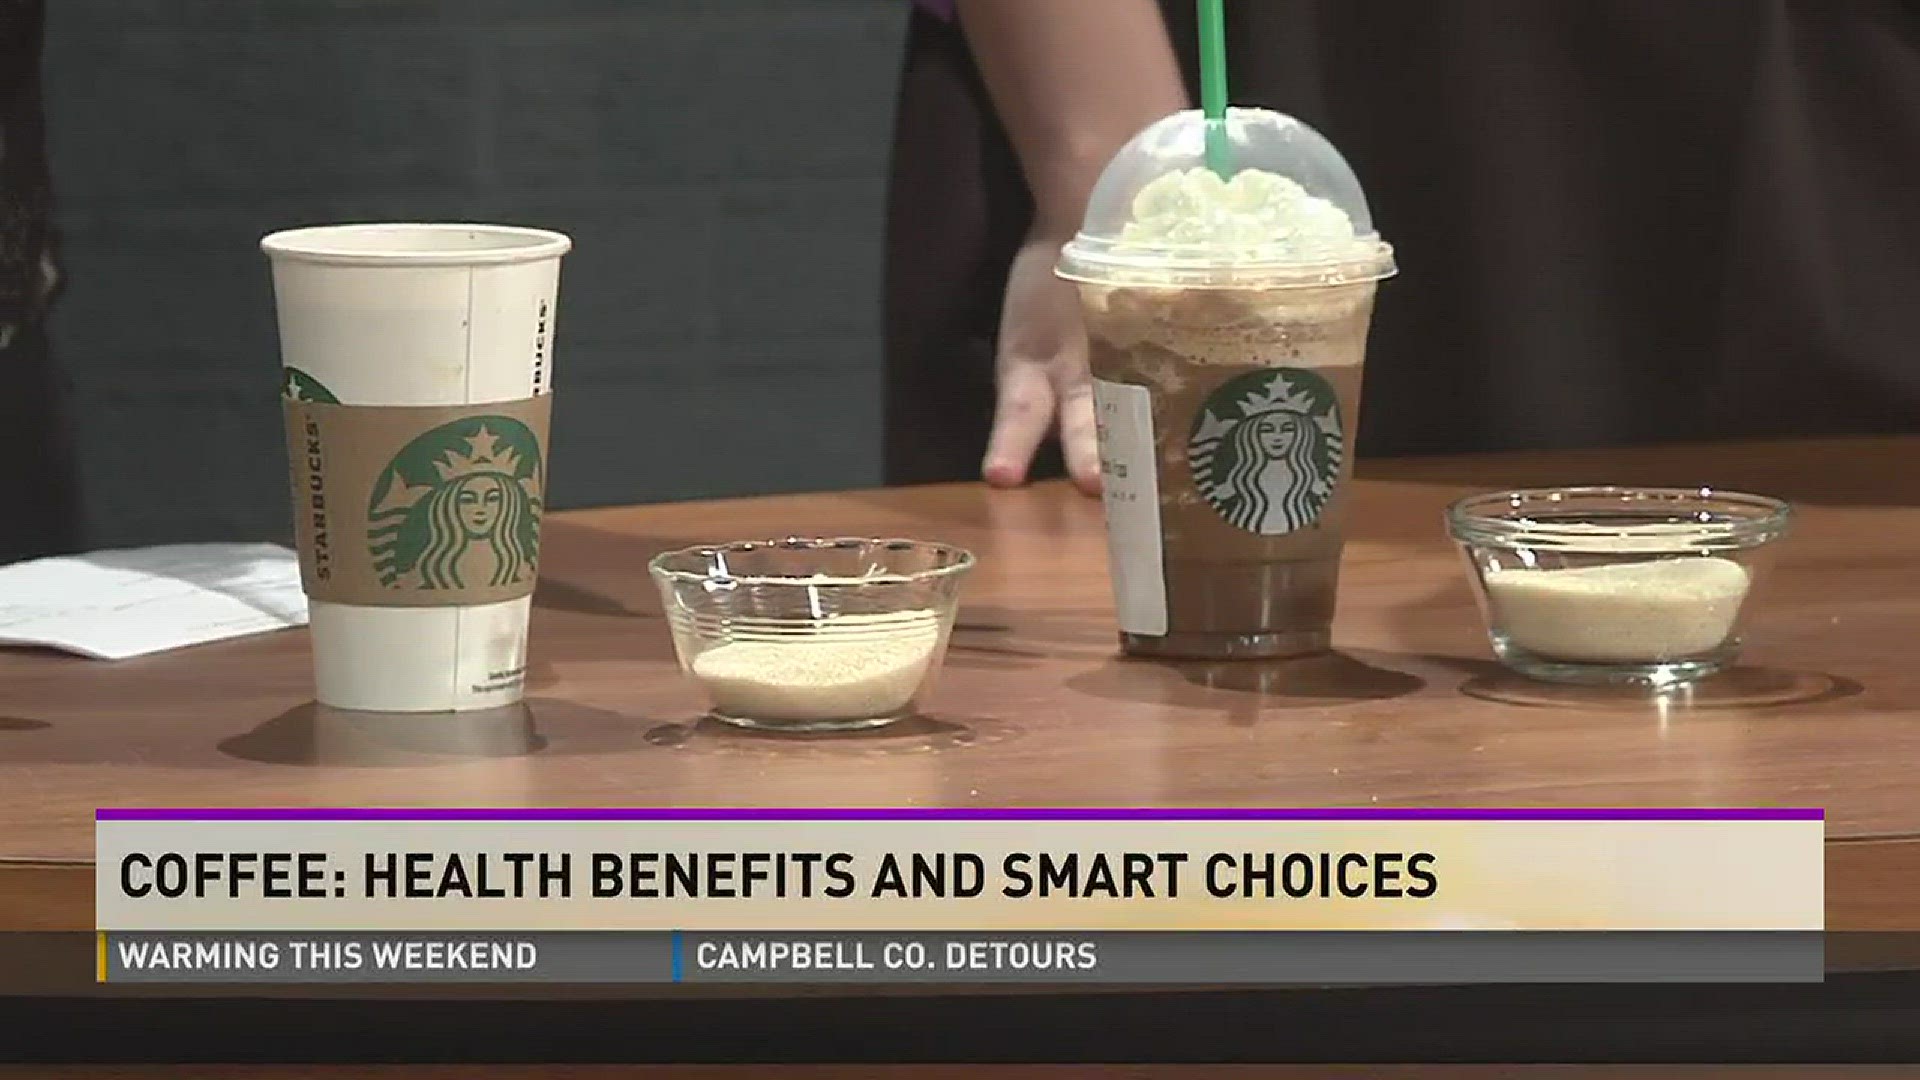 Coffee: Health Benefits and Smart Choices.